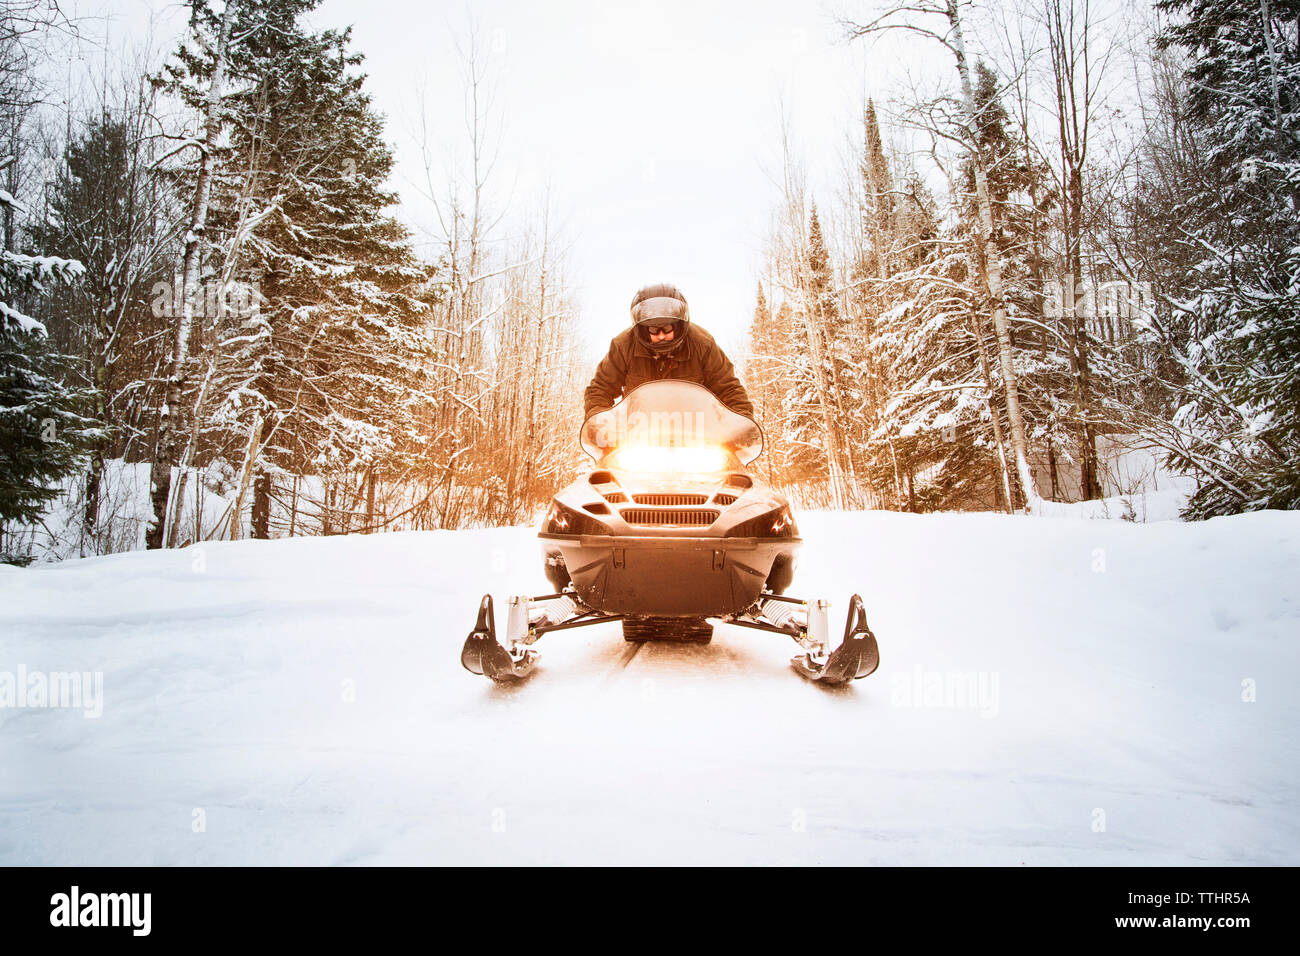 Man riding snowmobile on footpath amidst forest Stock Photo